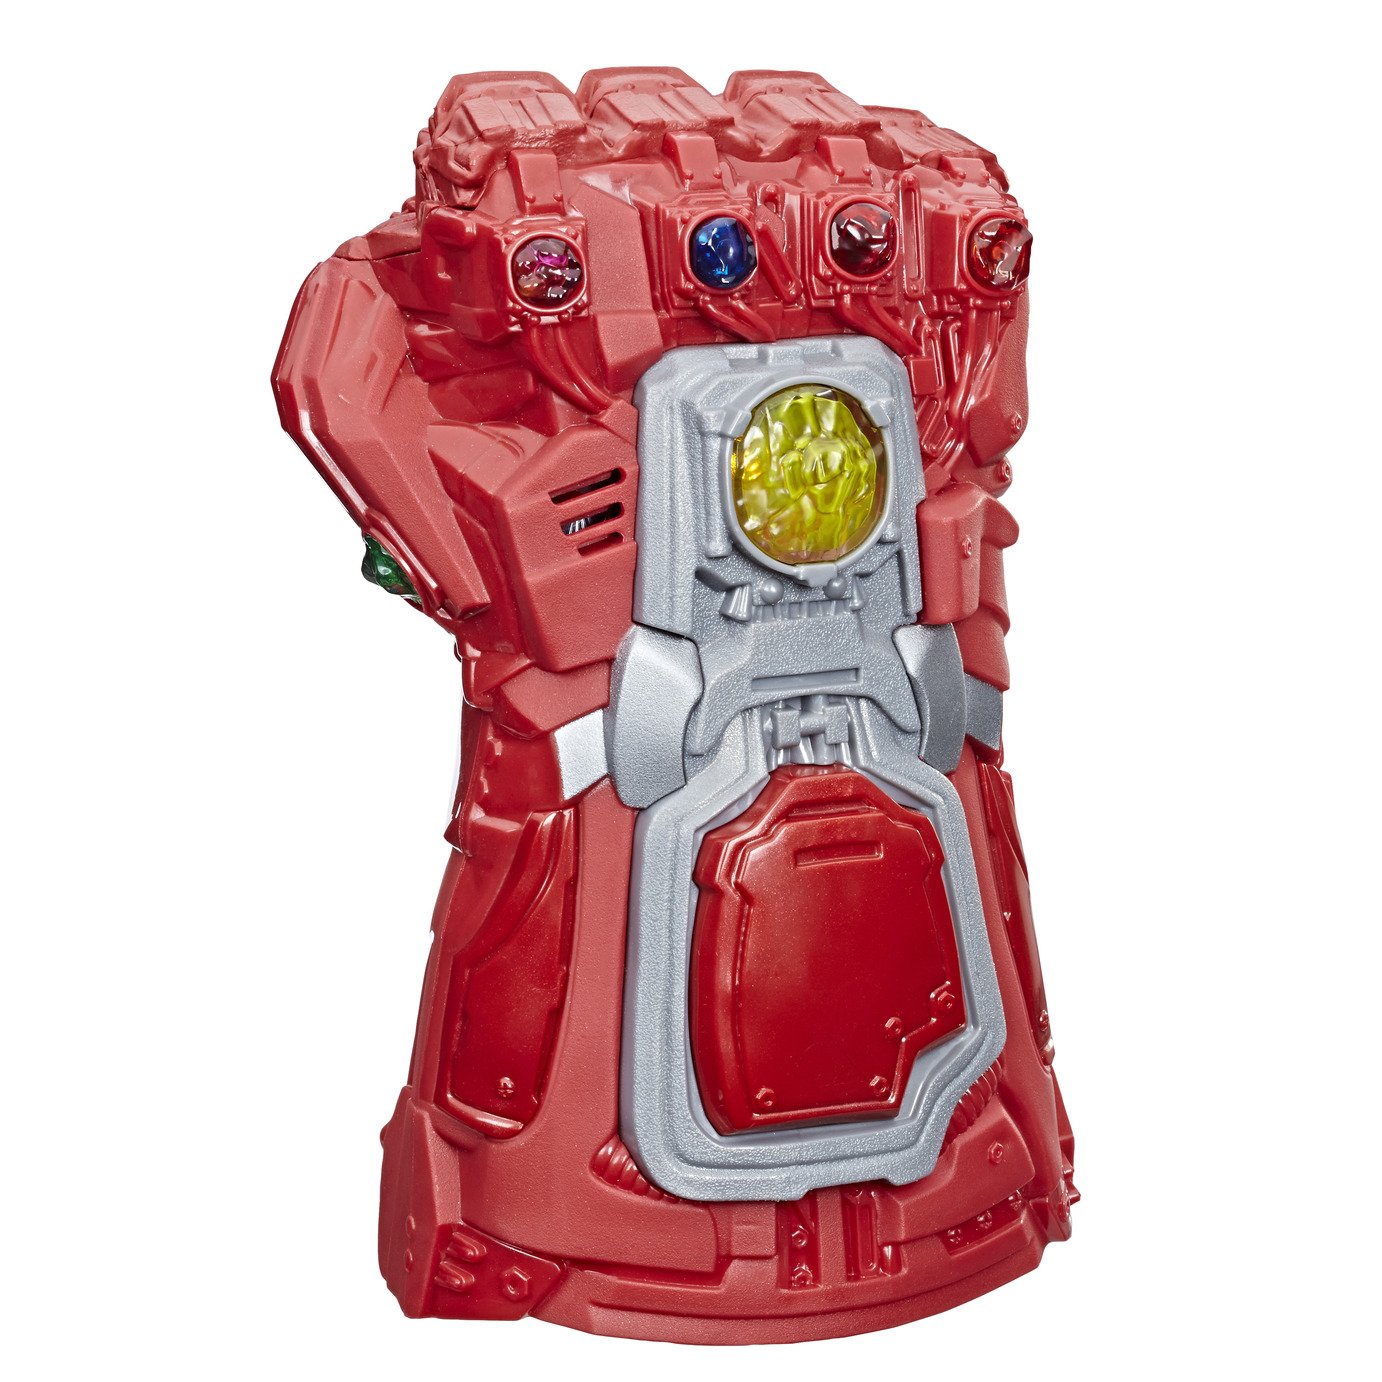 Avengers: Endgame Red Infinity Gauntlet Electronic Fist Review